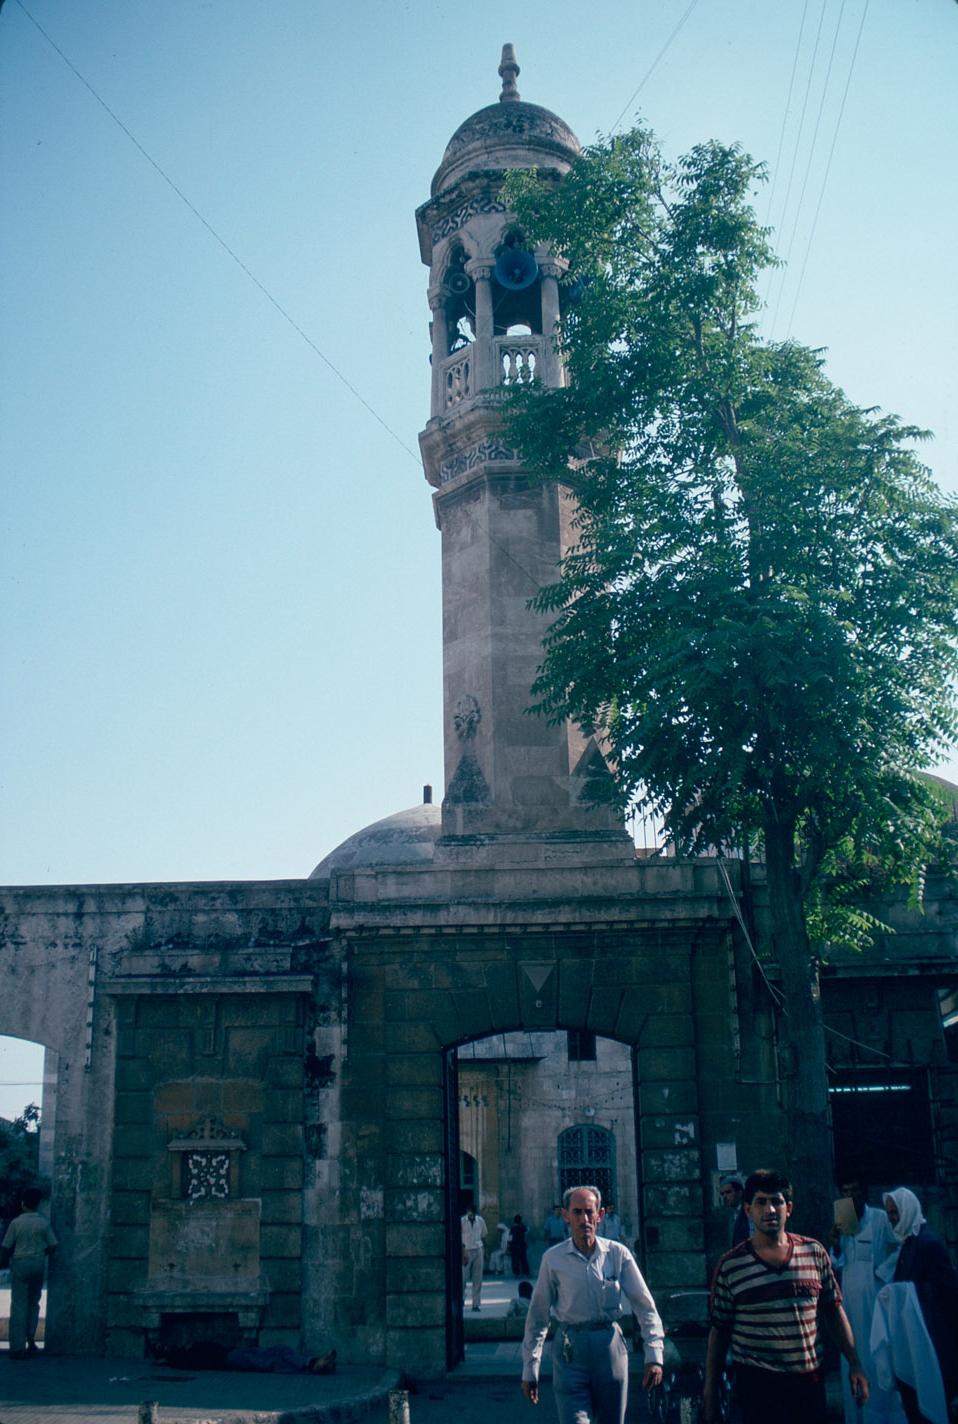 View of minaret above gate, street view